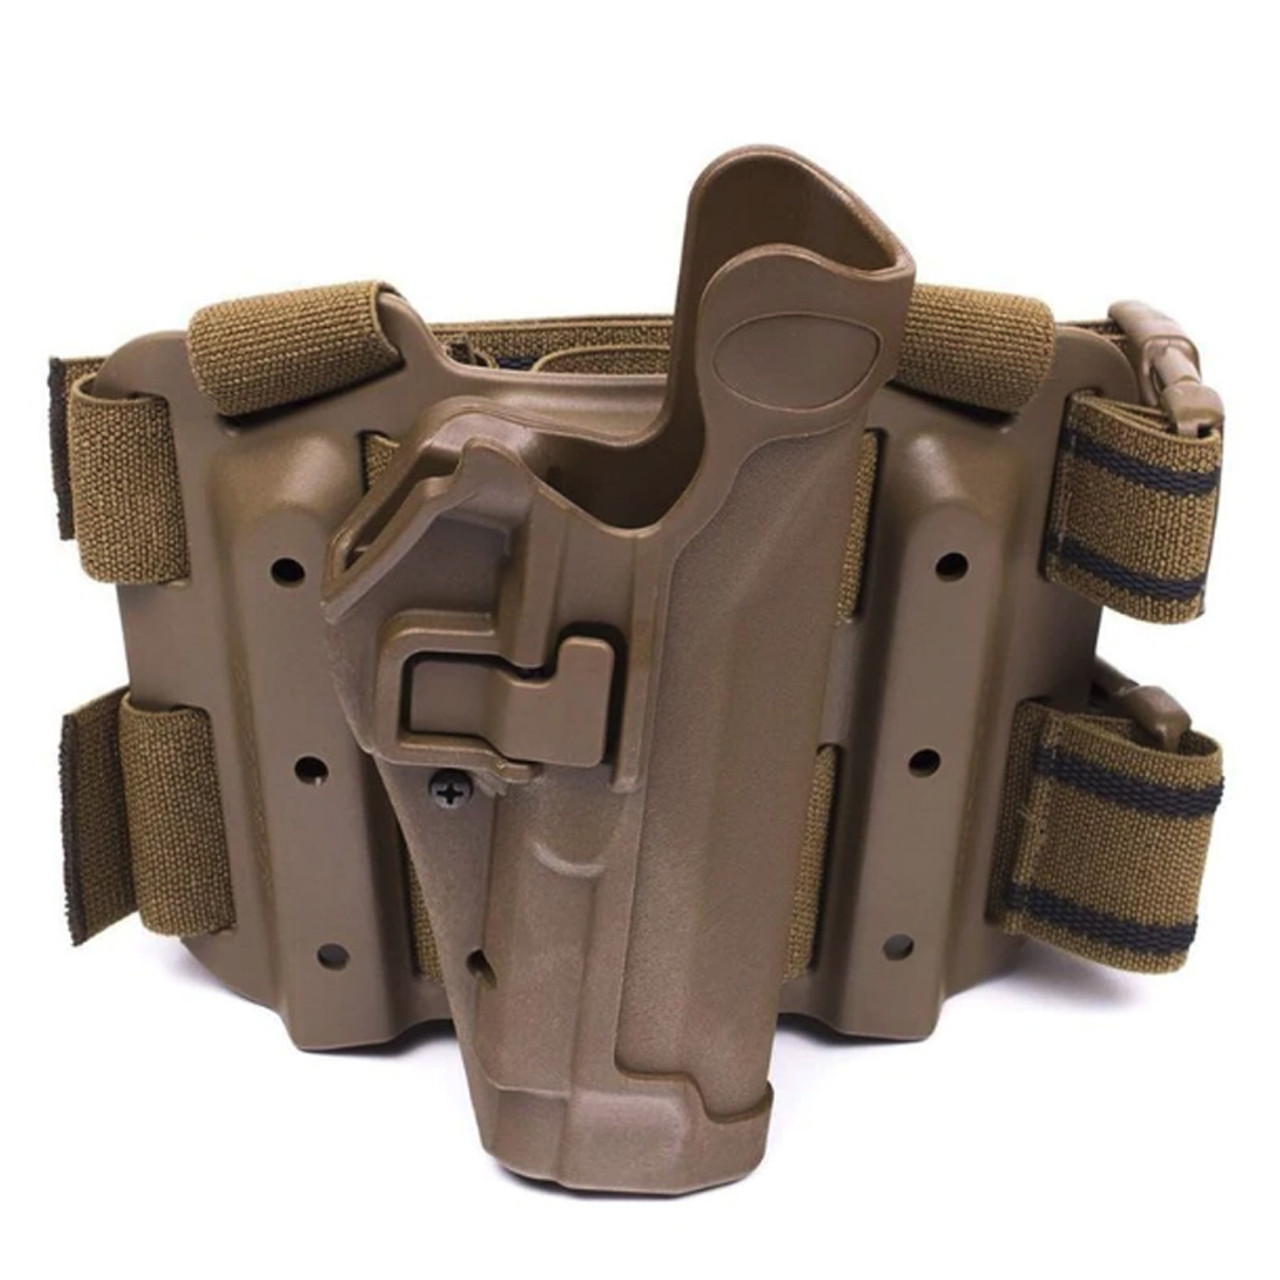 Blackhawk 4305 Serpa Level 2 Tactical Holster Available In Black Coyote Tan Foliage Green And